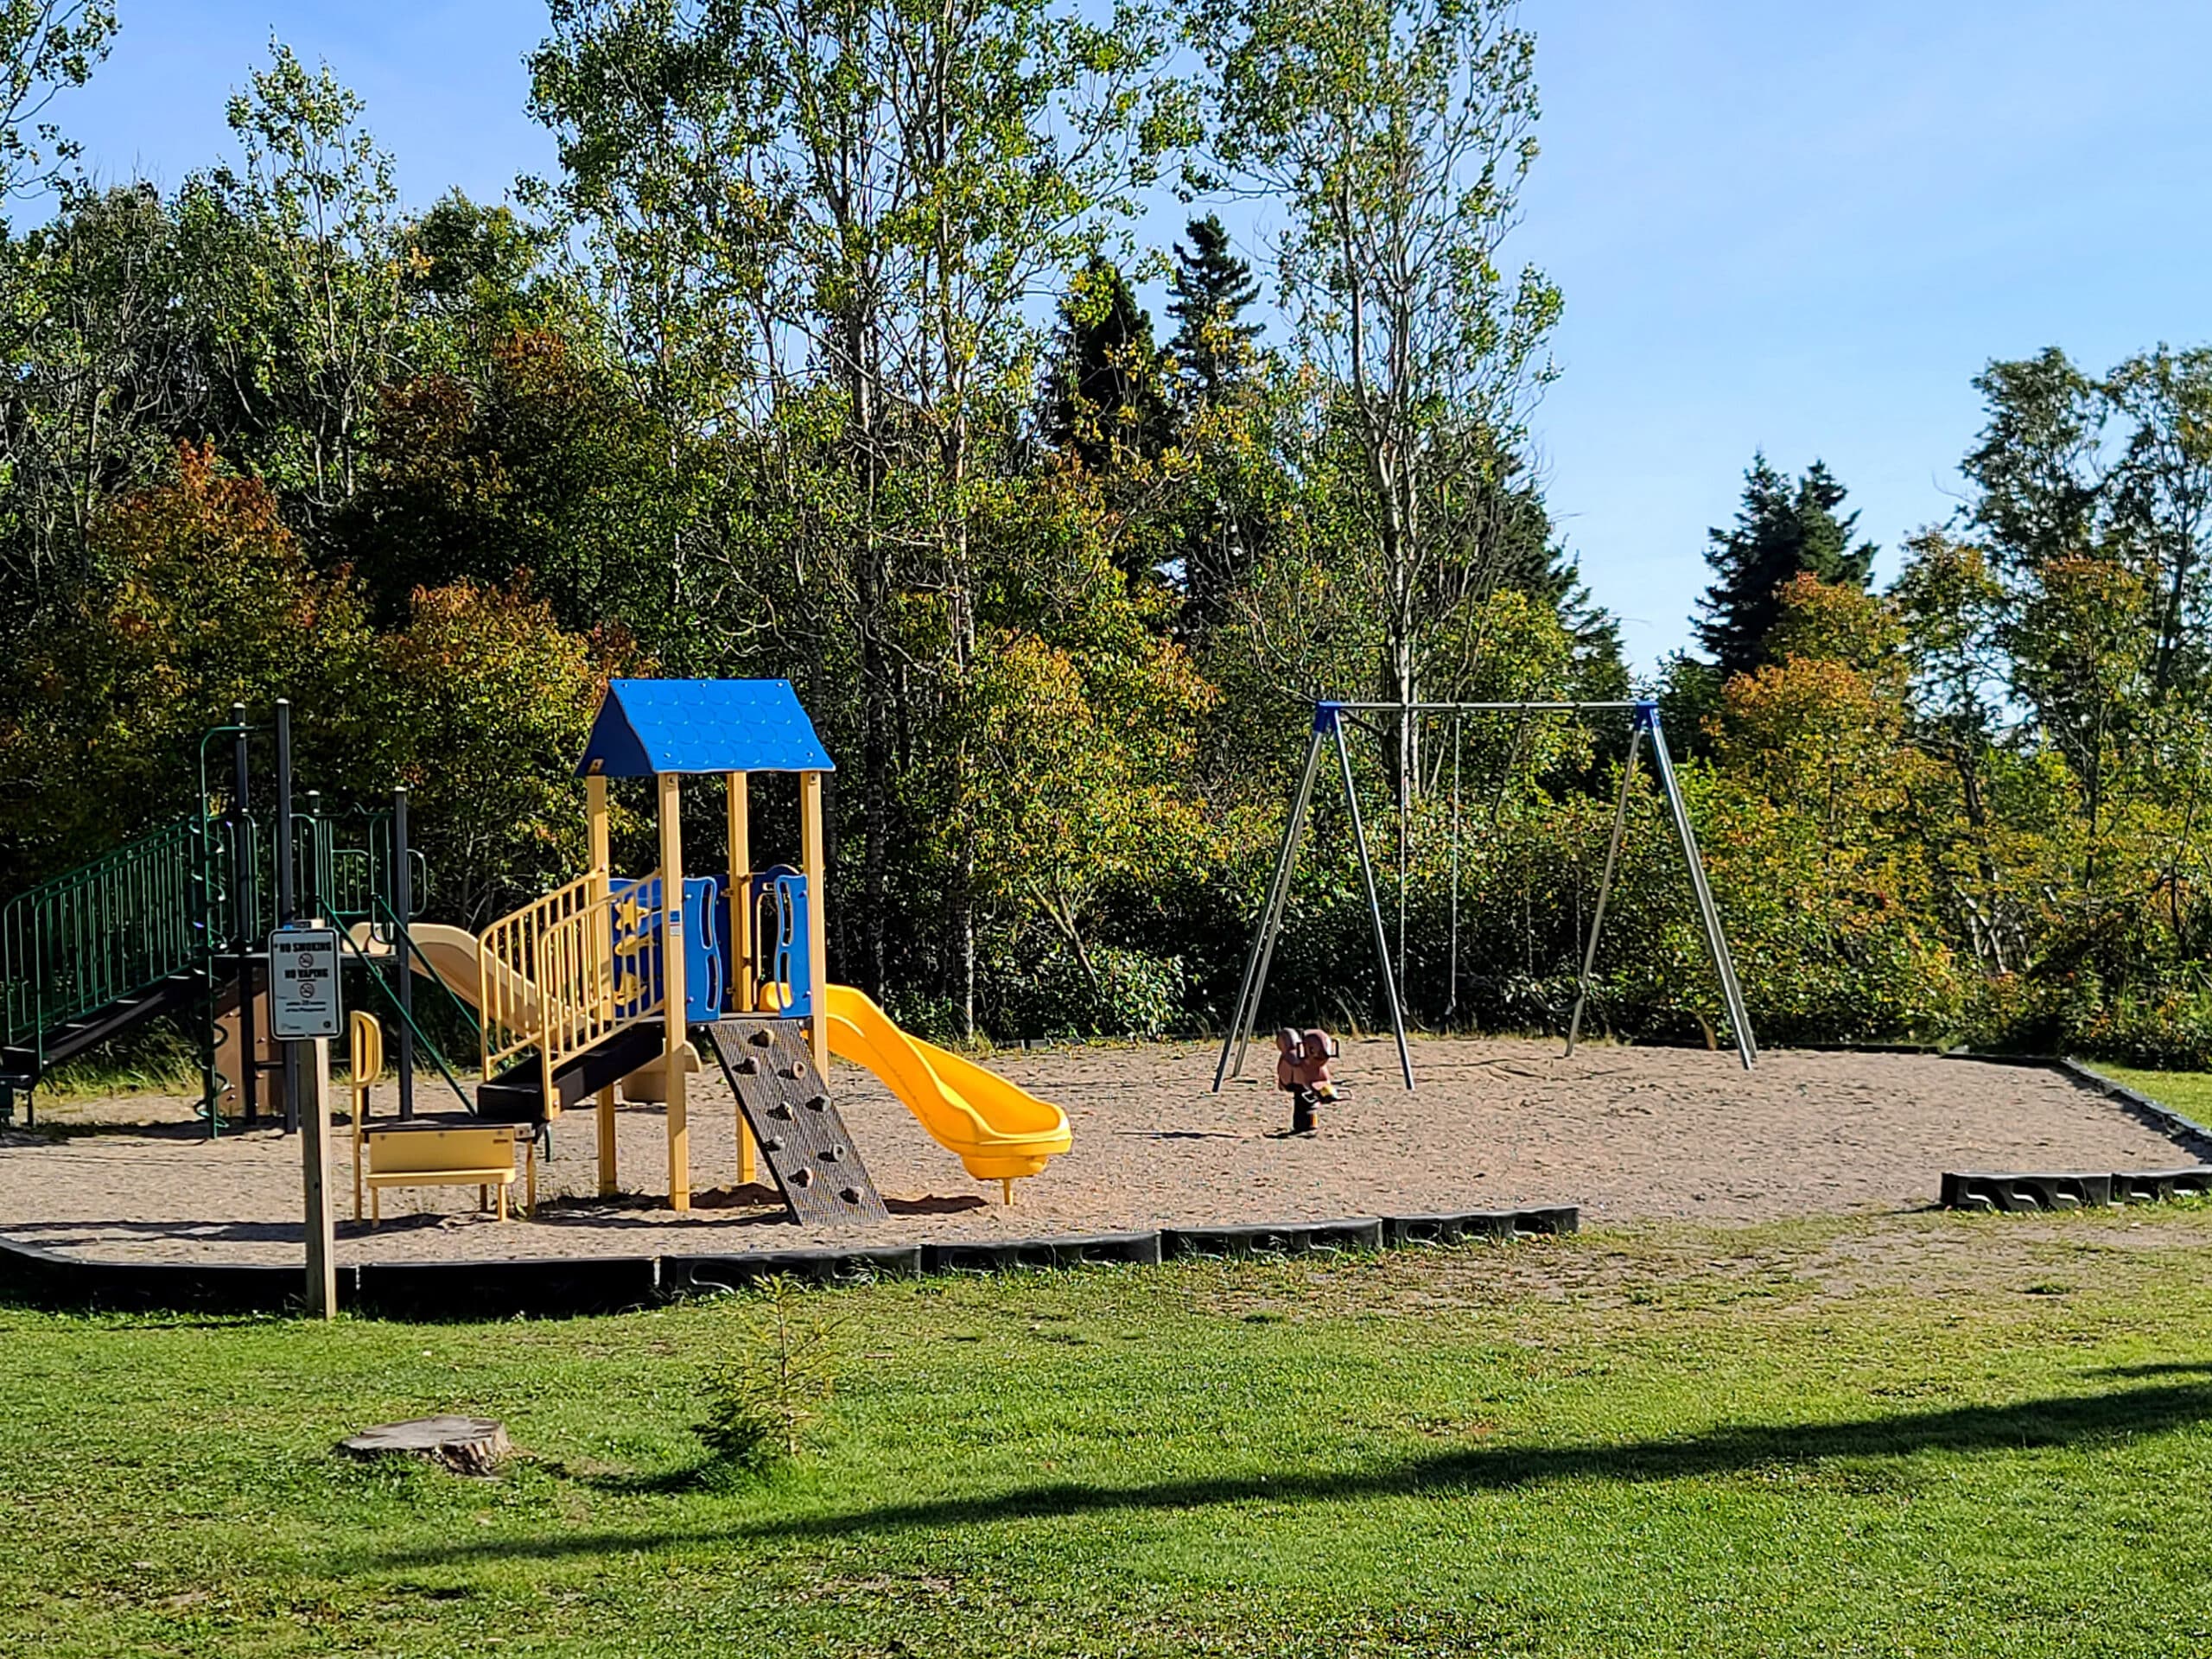 A small playground in neys provincial park.